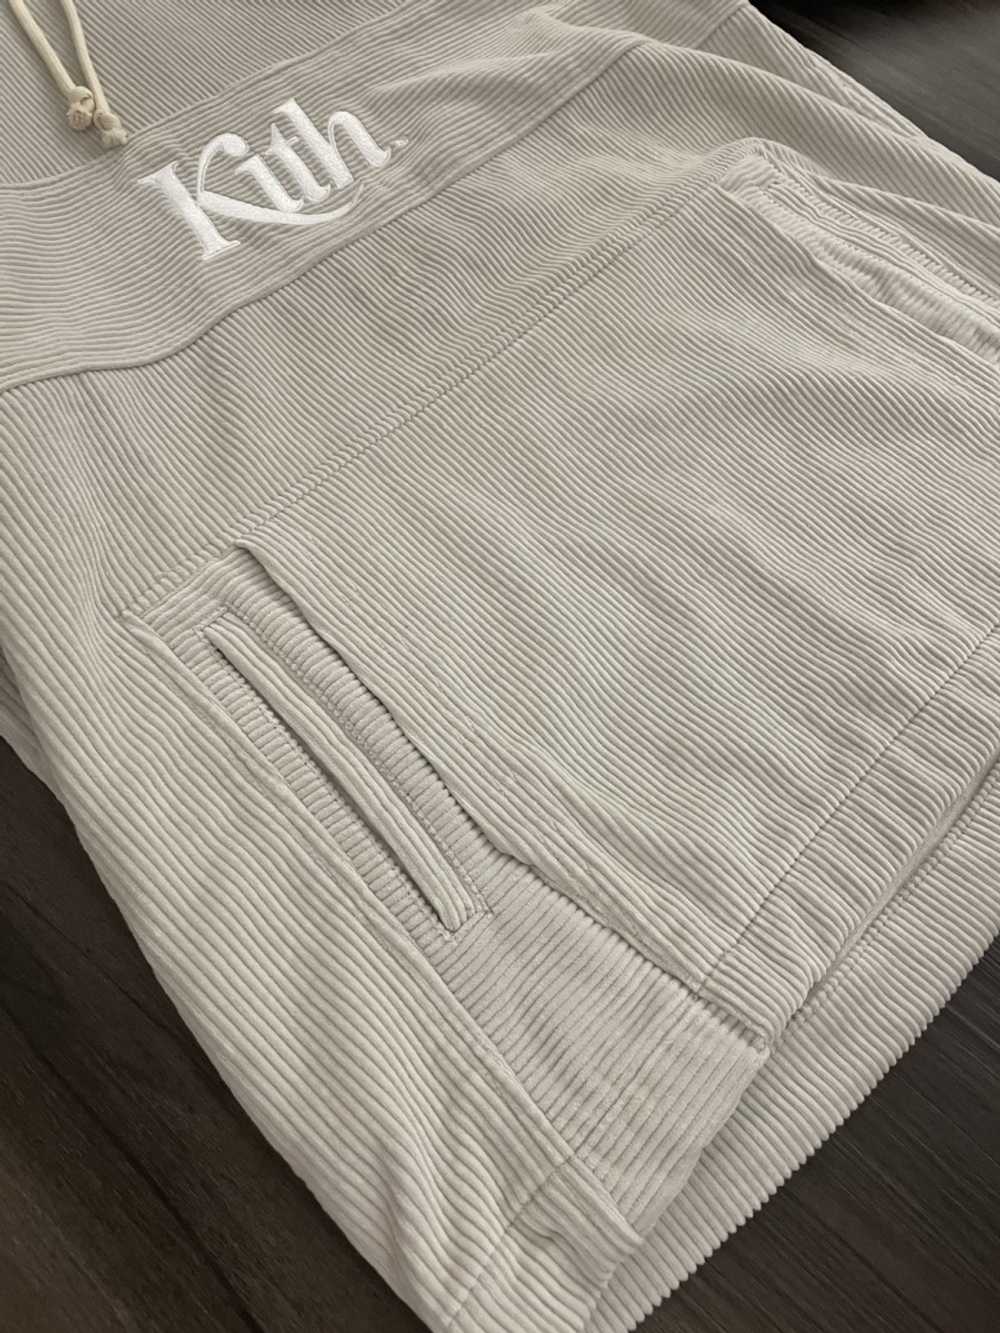 Kith - Corduroy double pocket hoodie with tags - image 4